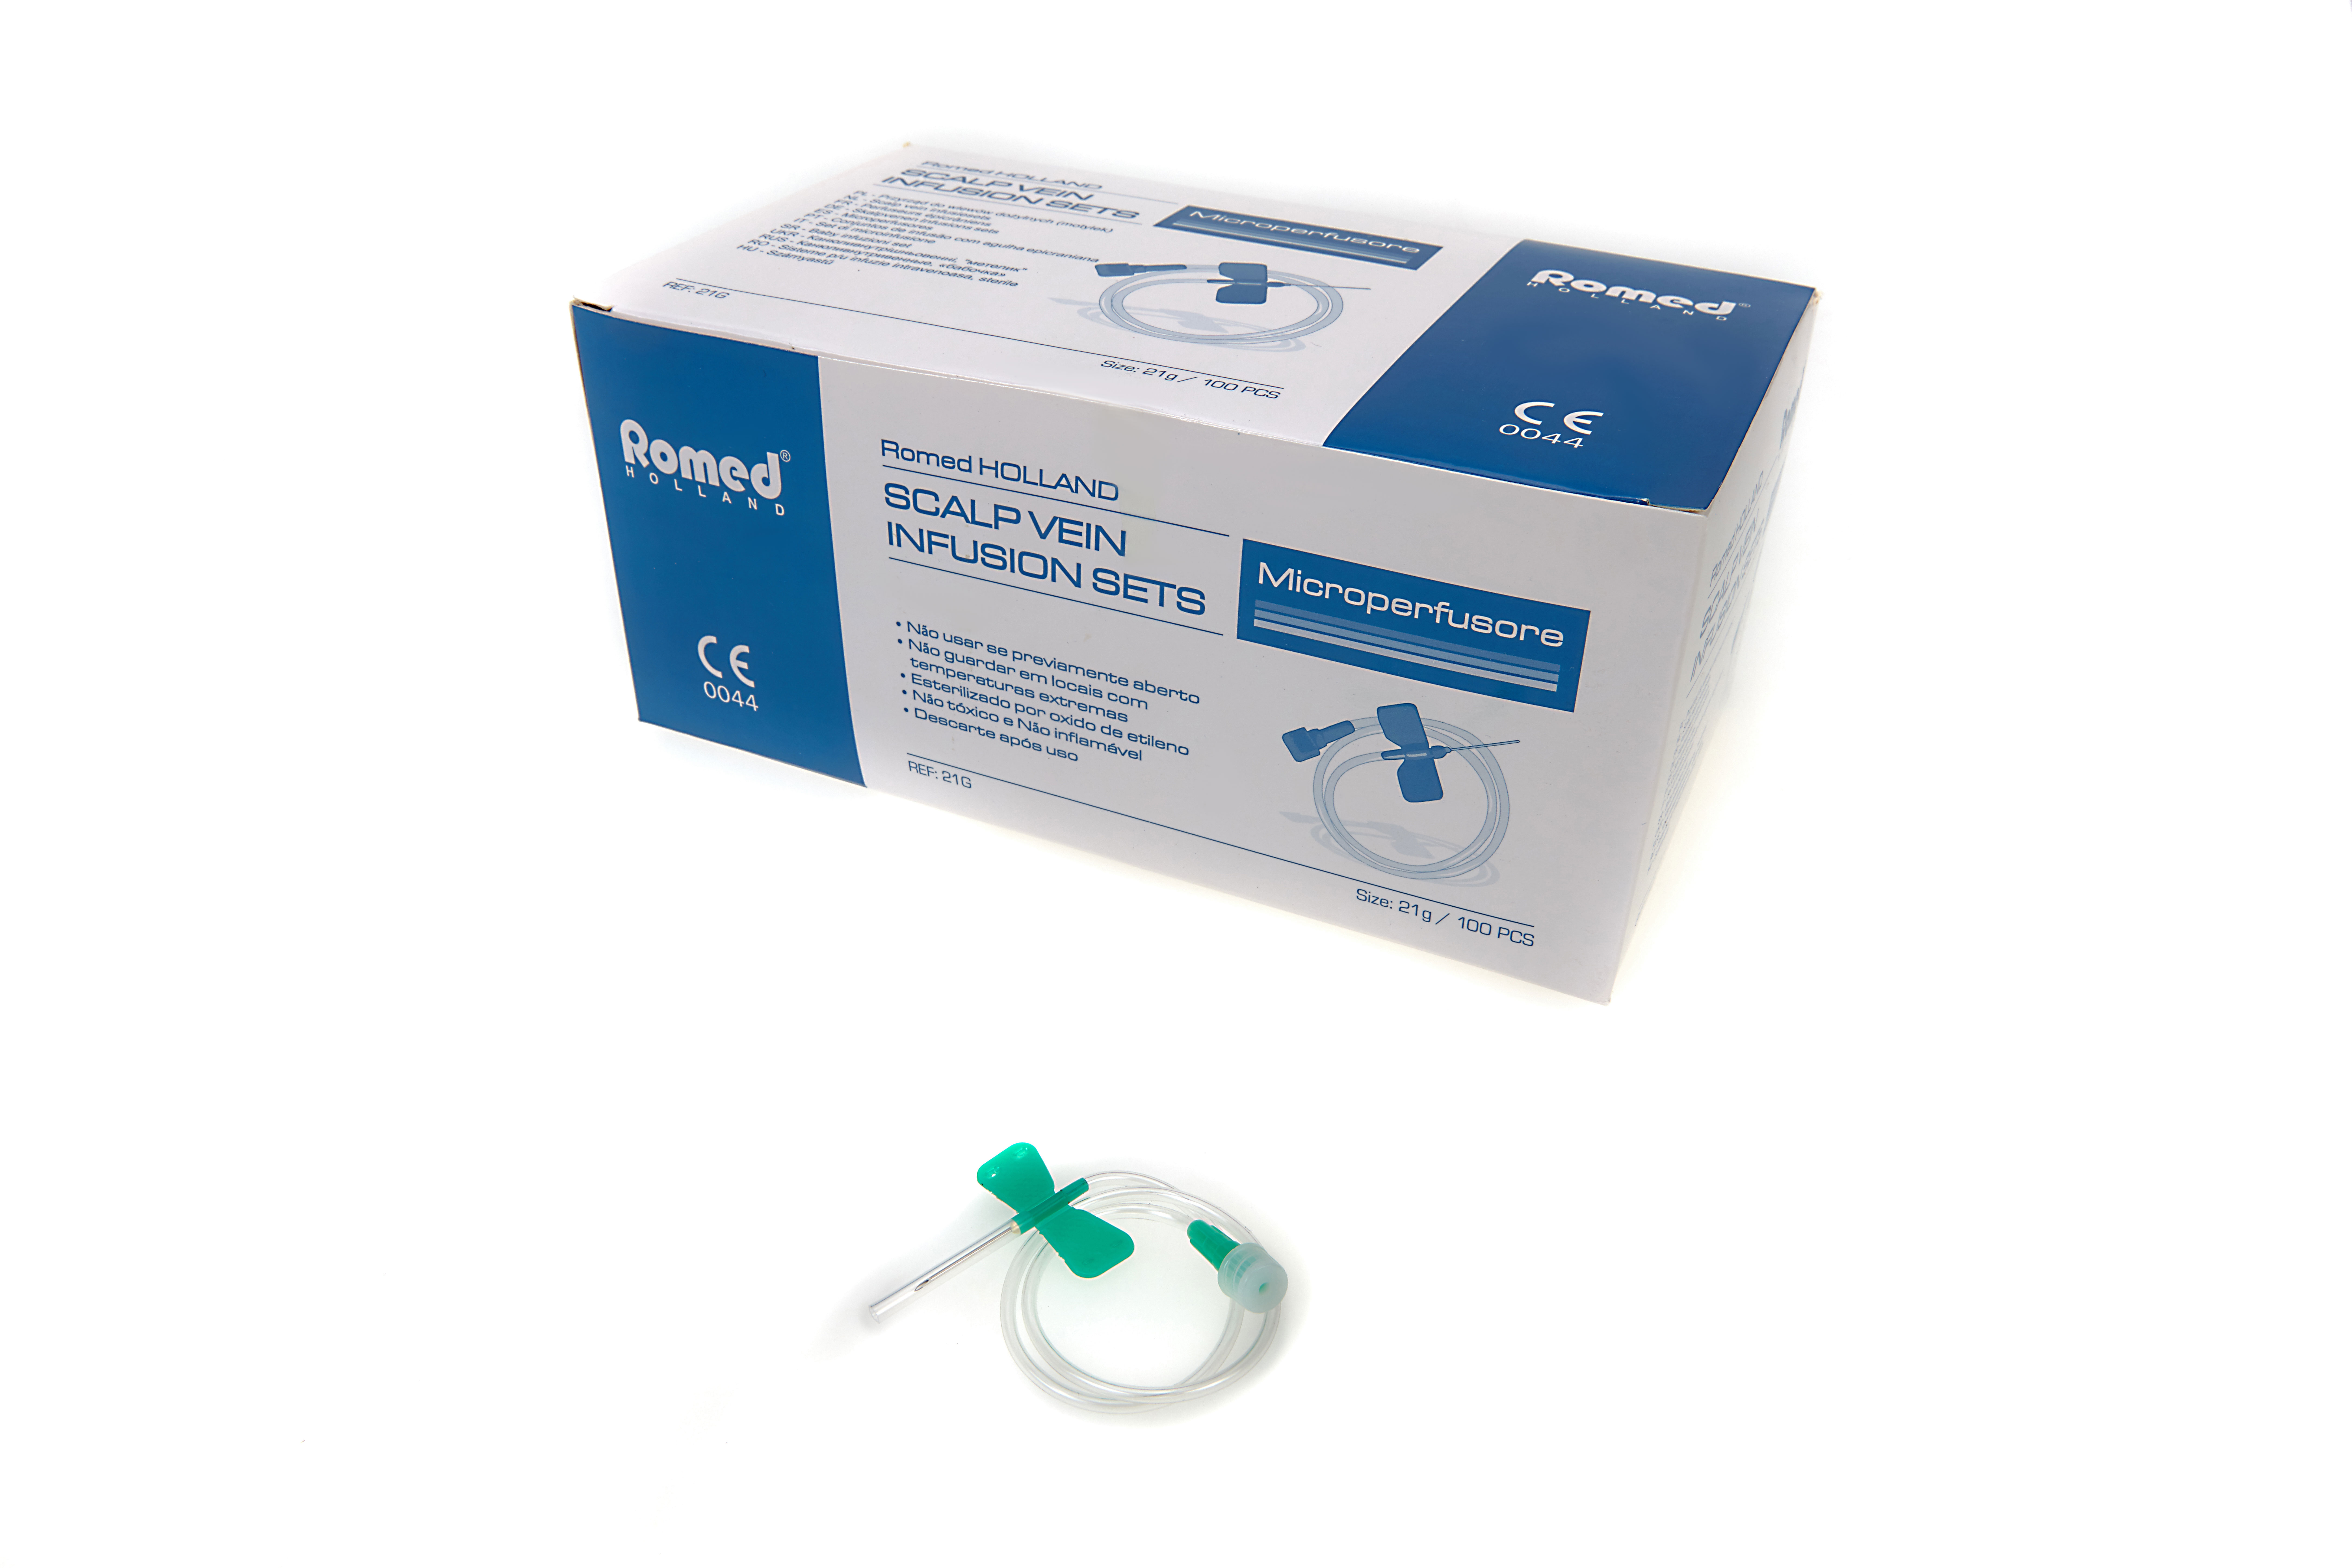 Scalp vein infusion sets